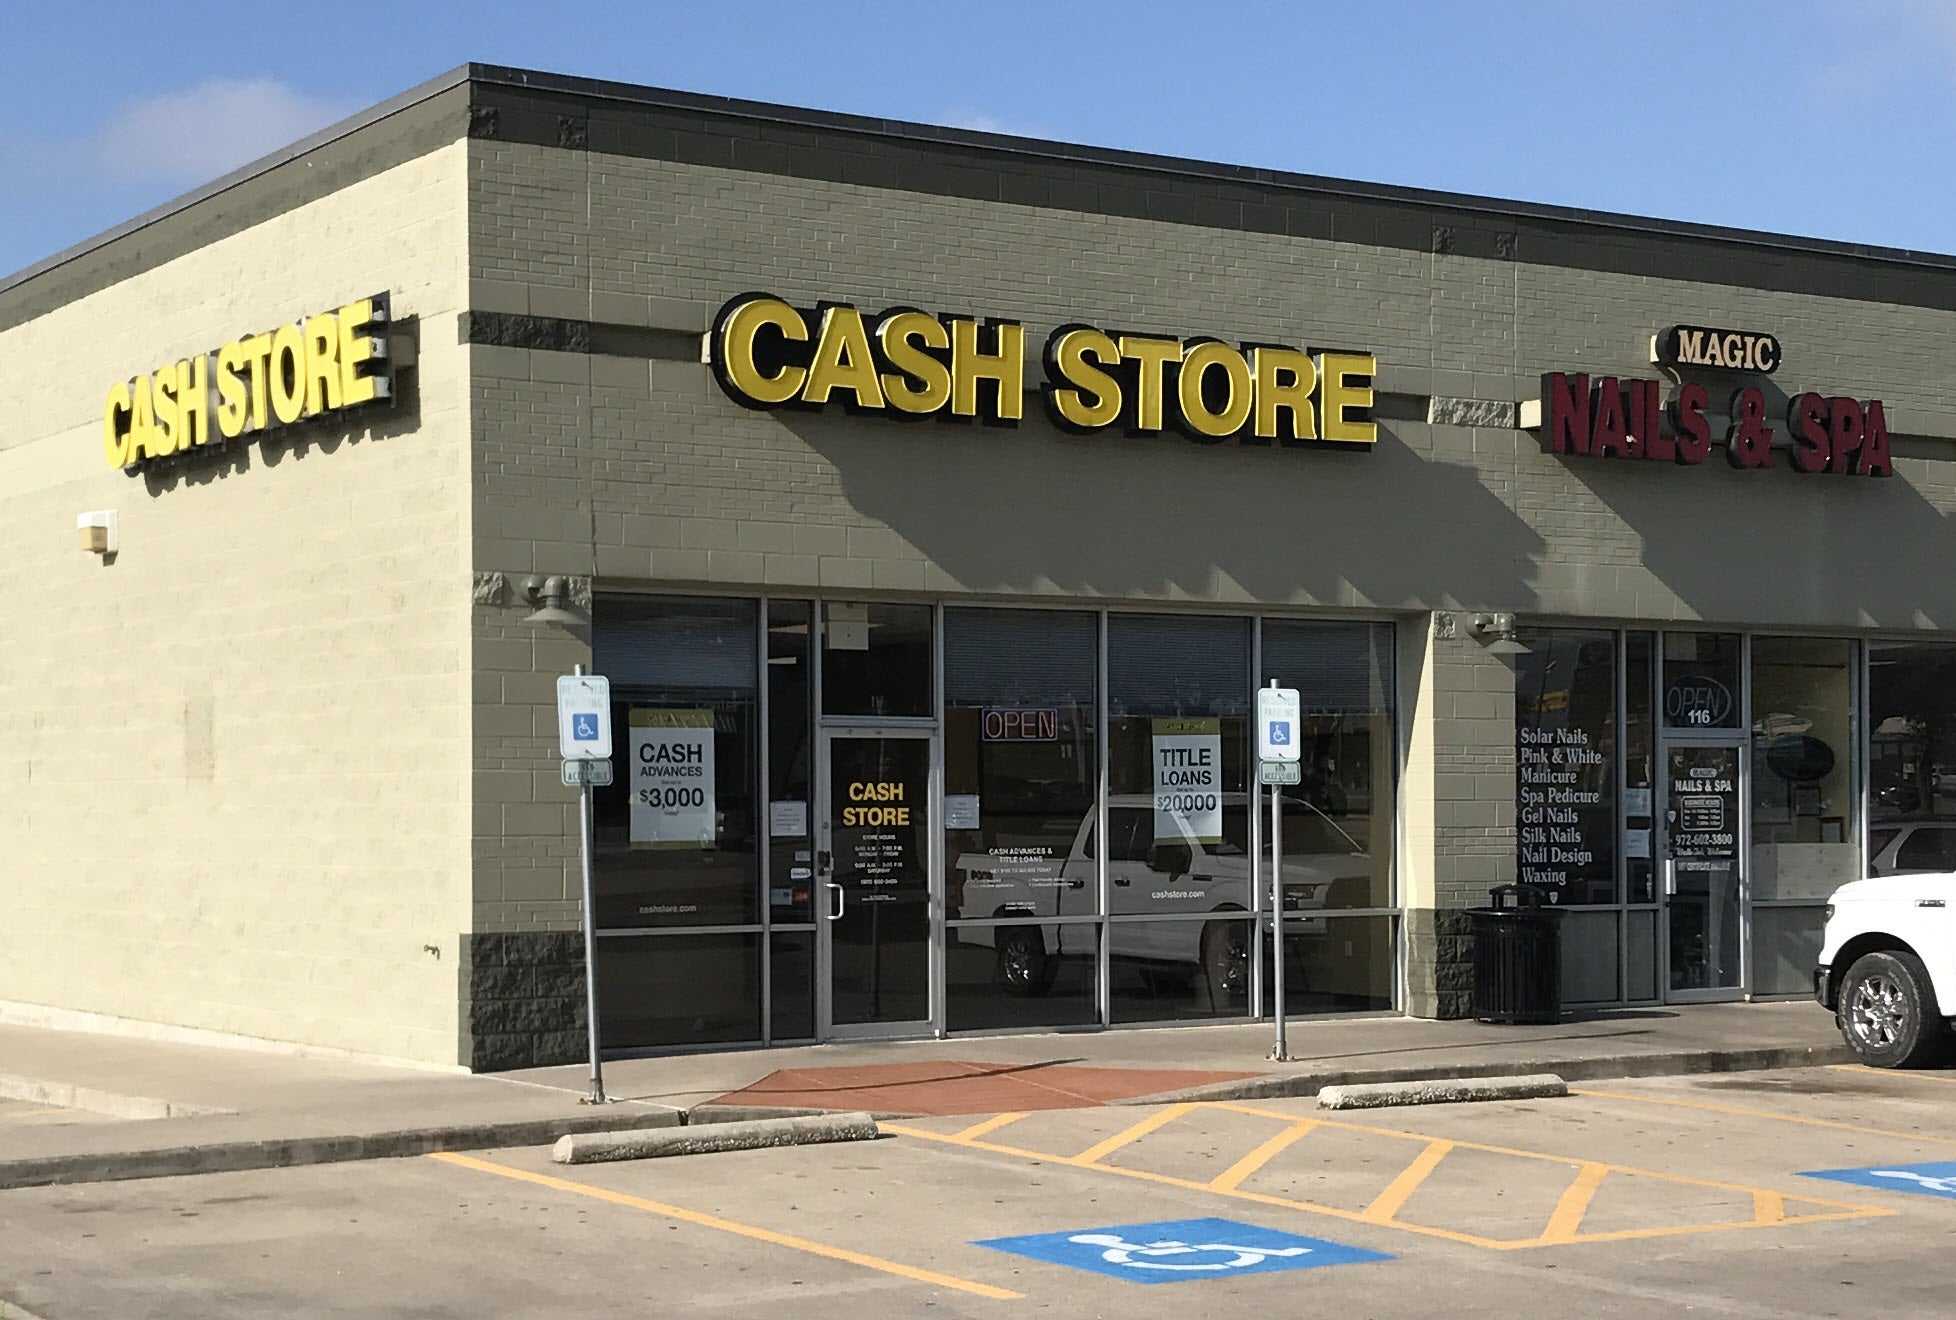 The Cash Store -  #721